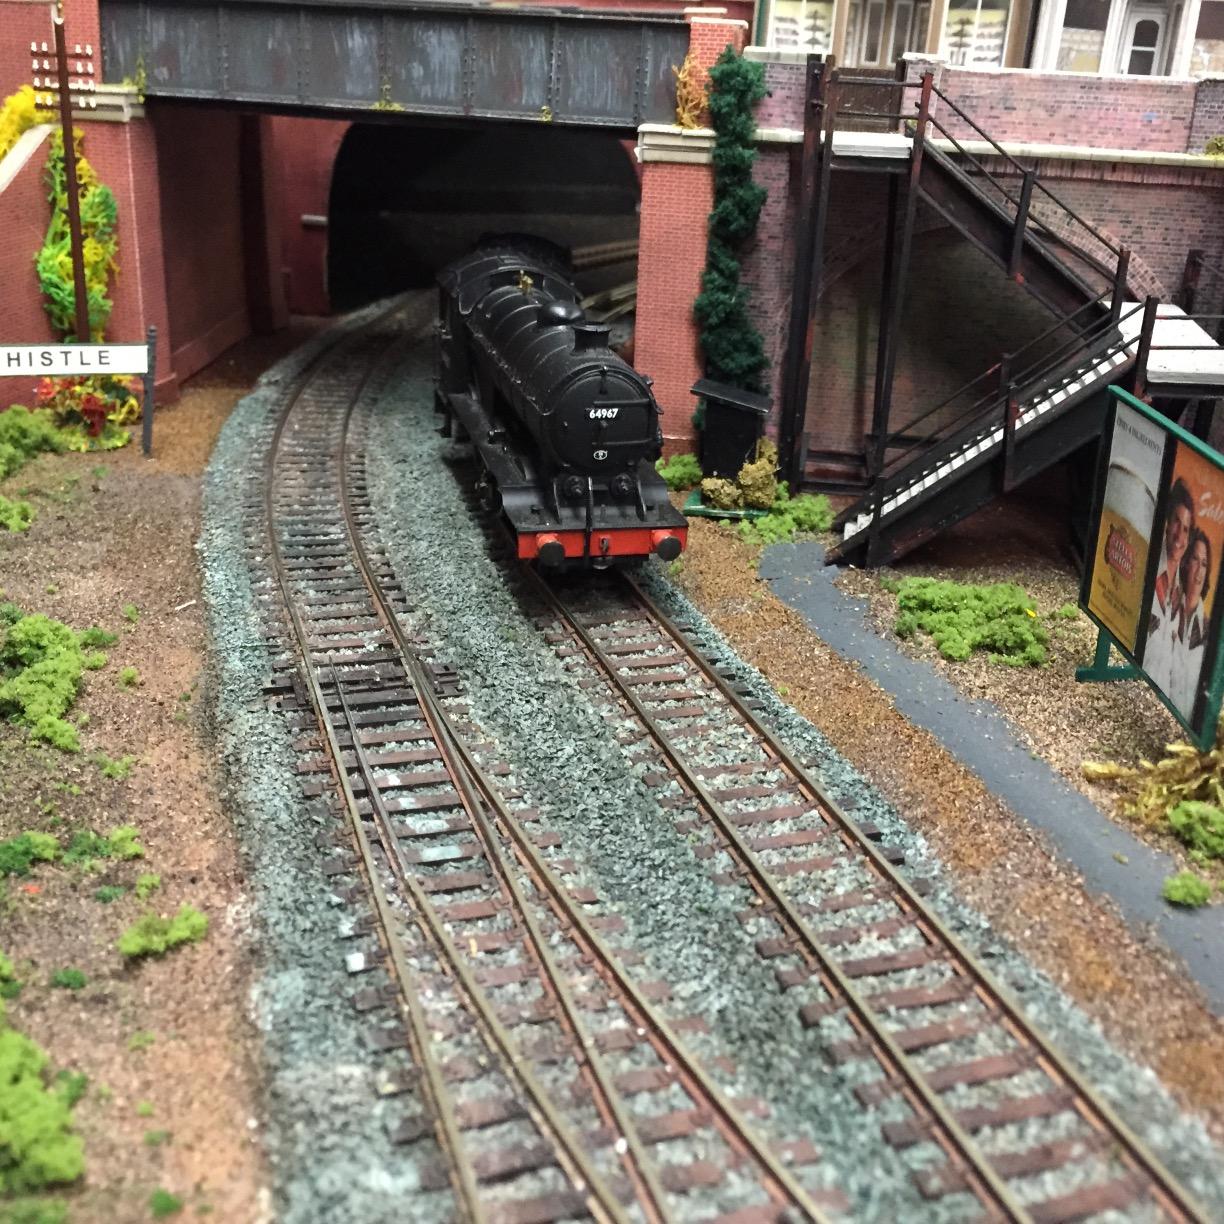 The Model Railway Club for Faversham and the surrounding area.